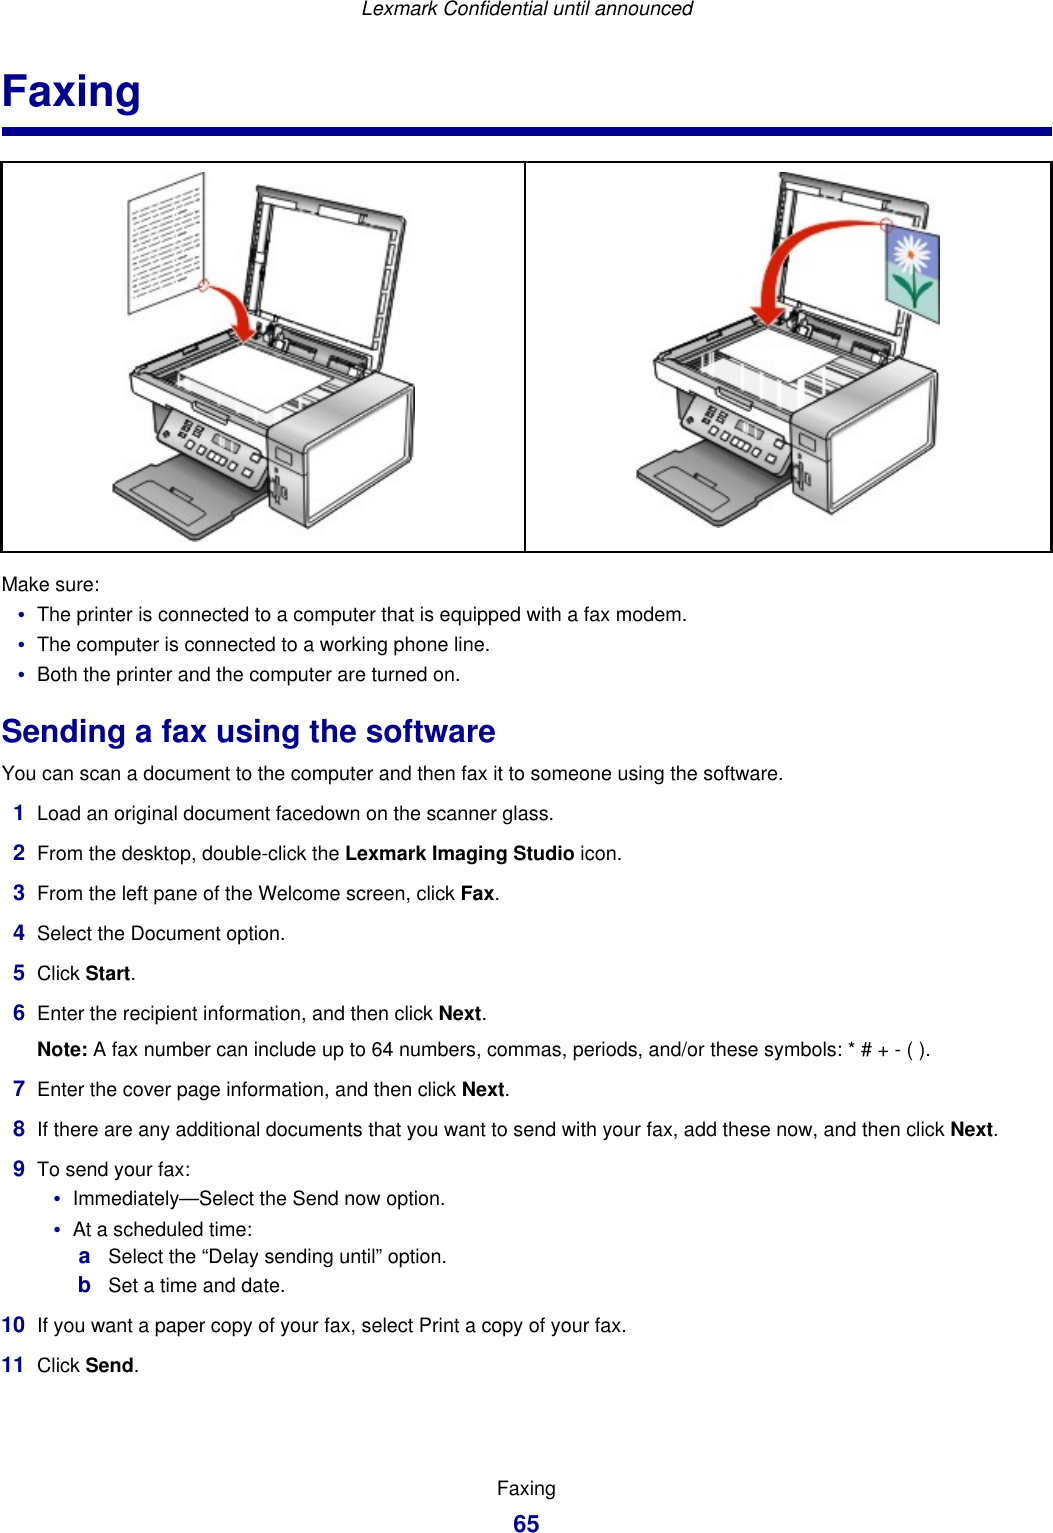 FaxingMake sure:•The printer is connected to a computer that is equipped with a fax modem.•The computer is connected to a working phone line.•Both the printer and the computer are turned on.Sending a fax using the softwareYou can scan a document to the computer and then fax it to someone using the software.1Load an original document facedown on the scanner glass.2From the desktop, double-click the Lexmark Imaging Studio icon.3From the left pane of the Welcome screen, click Fax.4Select the Document option.5Click Start.6Enter the recipient information, and then click Next.Note: A fax number can include up to 64 numbers, commas, periods, and/or these symbols: * # + - ( ).7Enter the cover page information, and then click Next.8If there are any additional documents that you want to send with your fax, add these now, and then click Next.9To send your fax:•Immediately—Select the Send now option.•At a scheduled time:aSelect the “Delay sending until” option.bSet a time and date.10 If you want a paper copy of your fax, select Print a copy of your fax.11 Click Send.Lexmark Confidential until announcedFaxing65